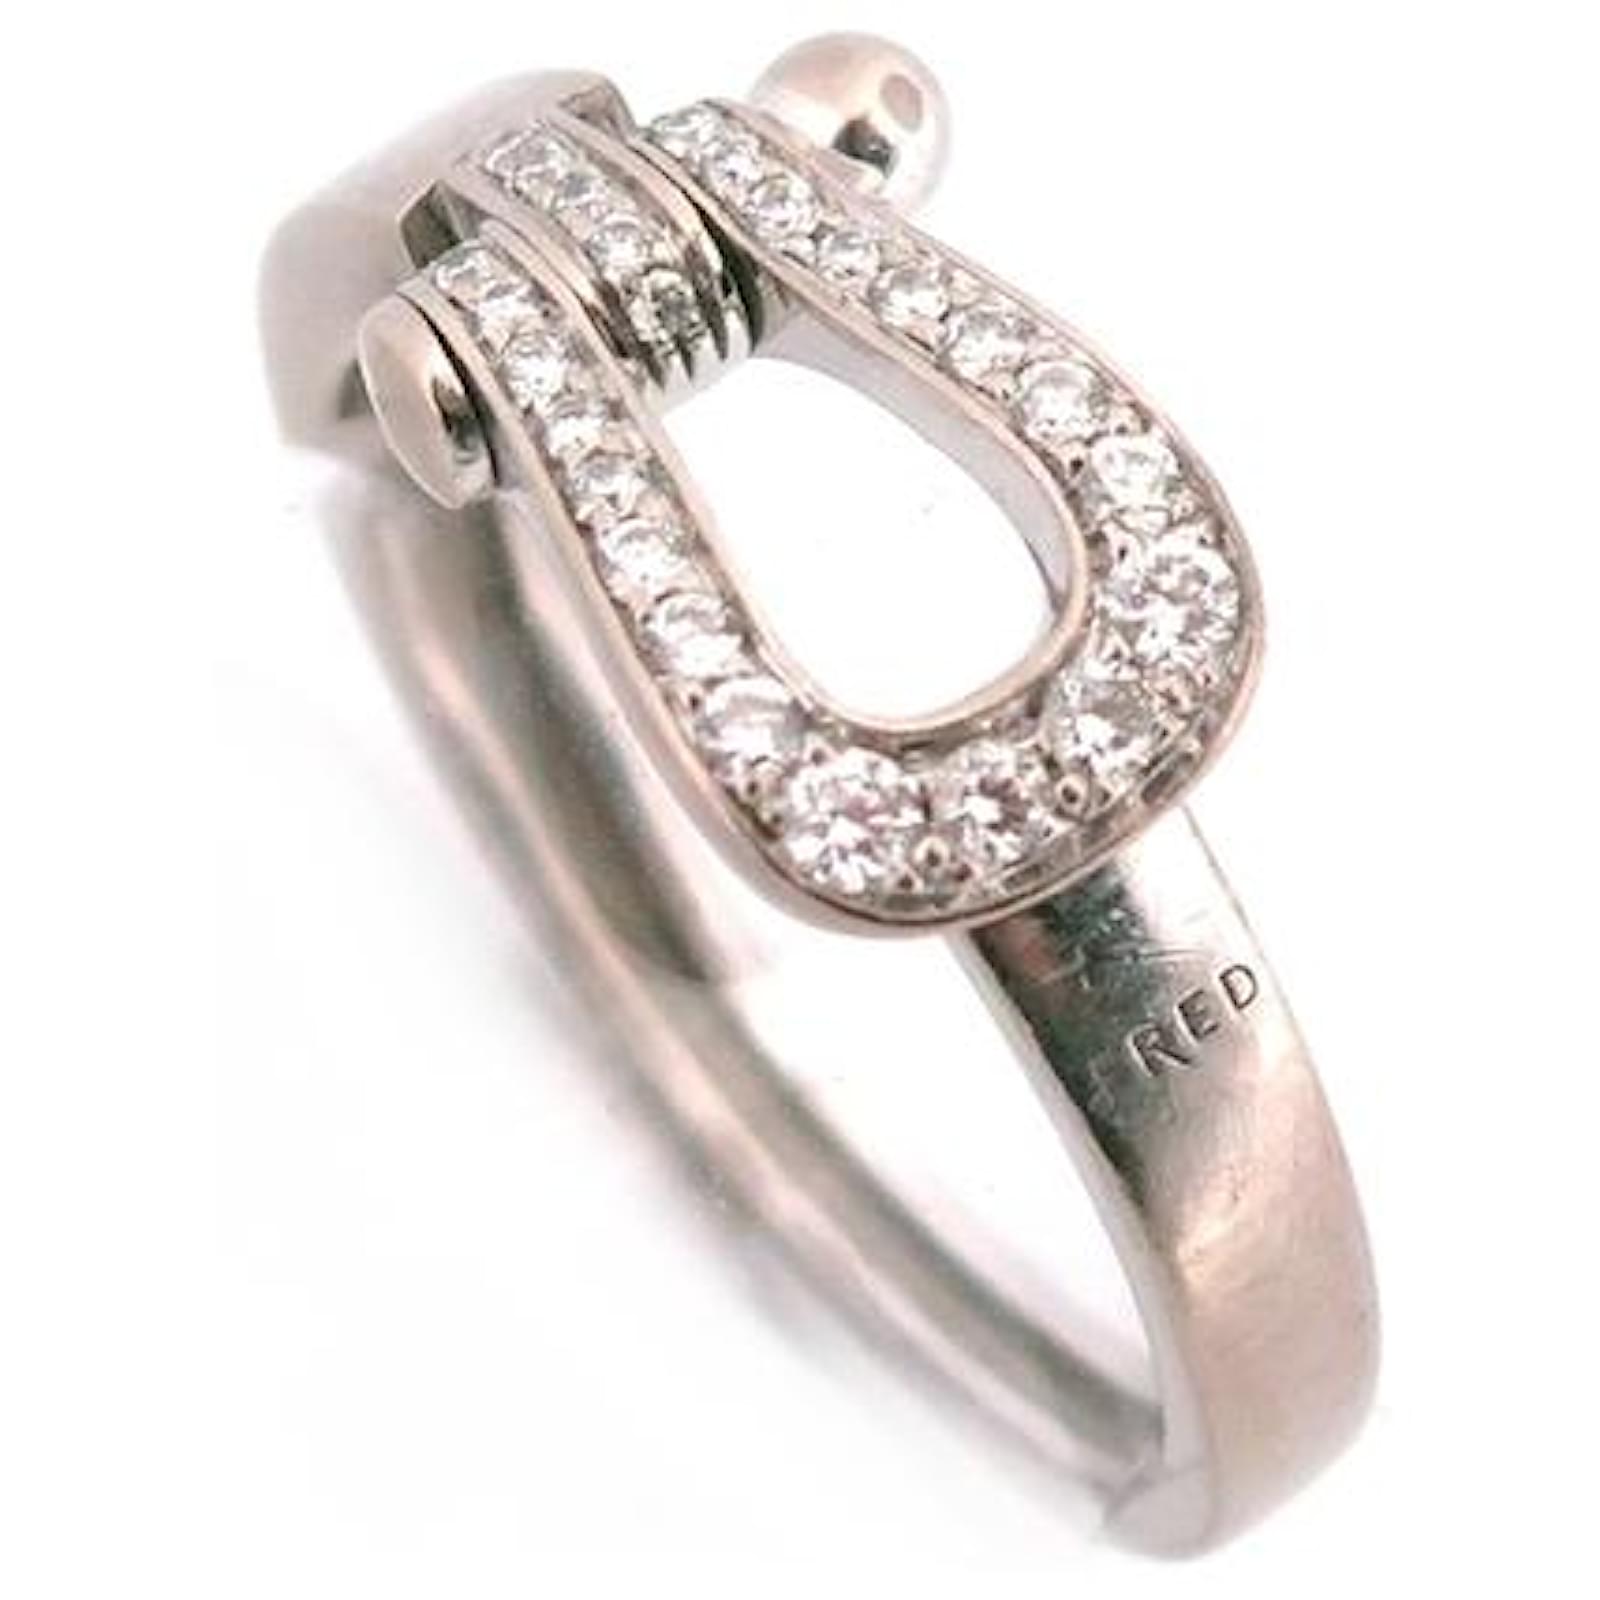 Fred Force ring 10 mm 4b0379 taille 56 WHITE GOLD 18K & DIAMONDS